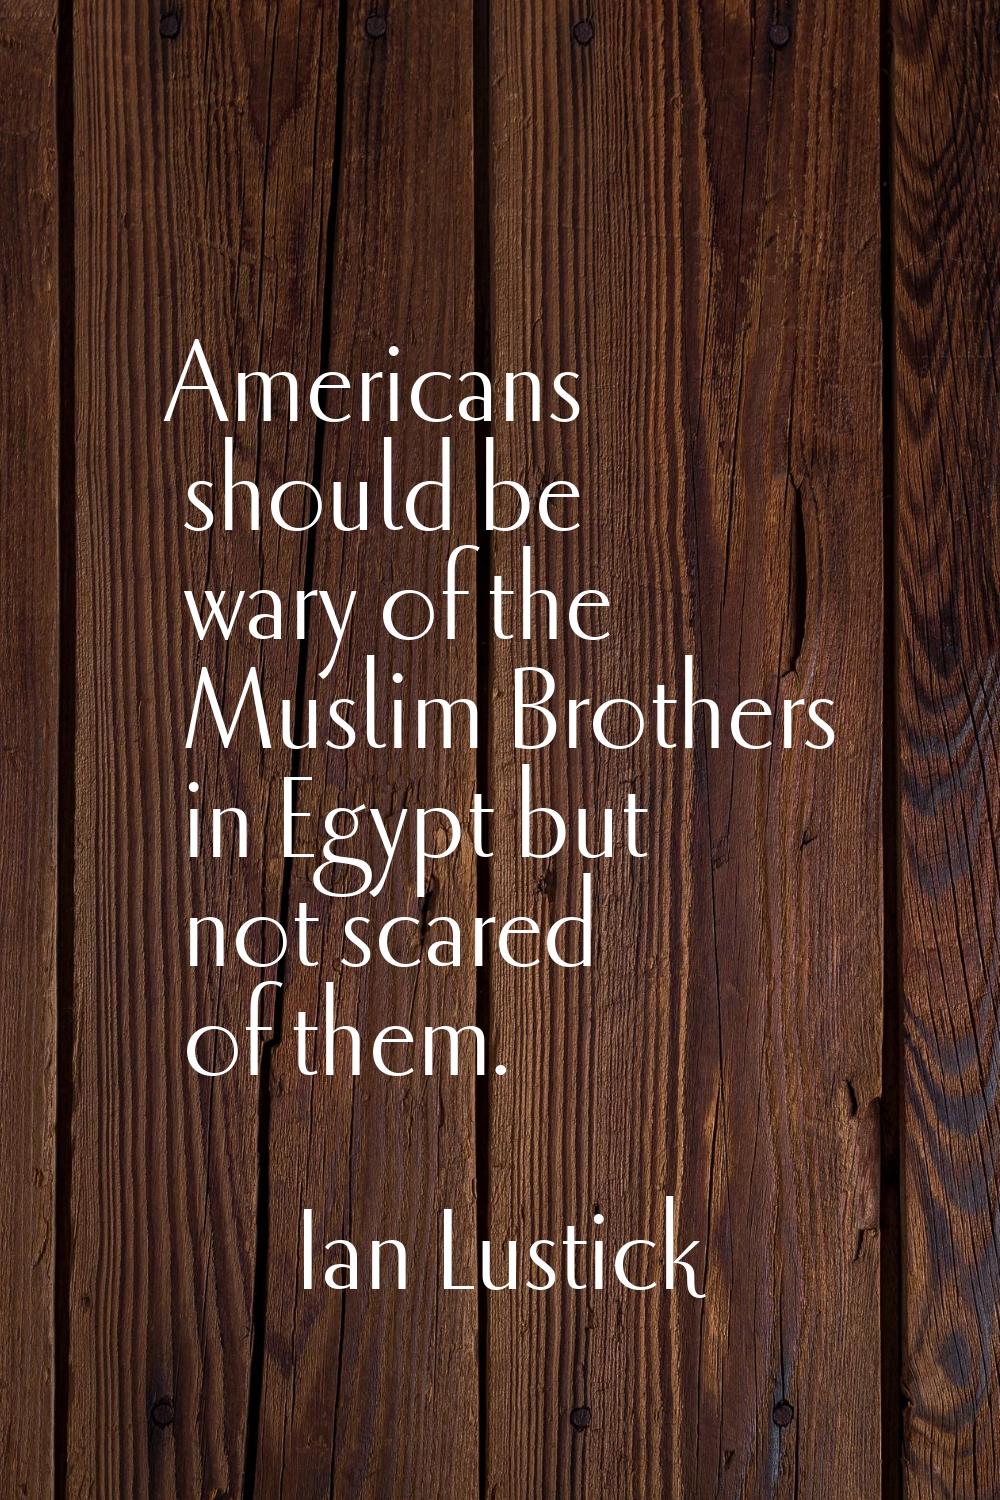 Americans should be wary of the Muslim Brothers in Egypt but not scared of them.